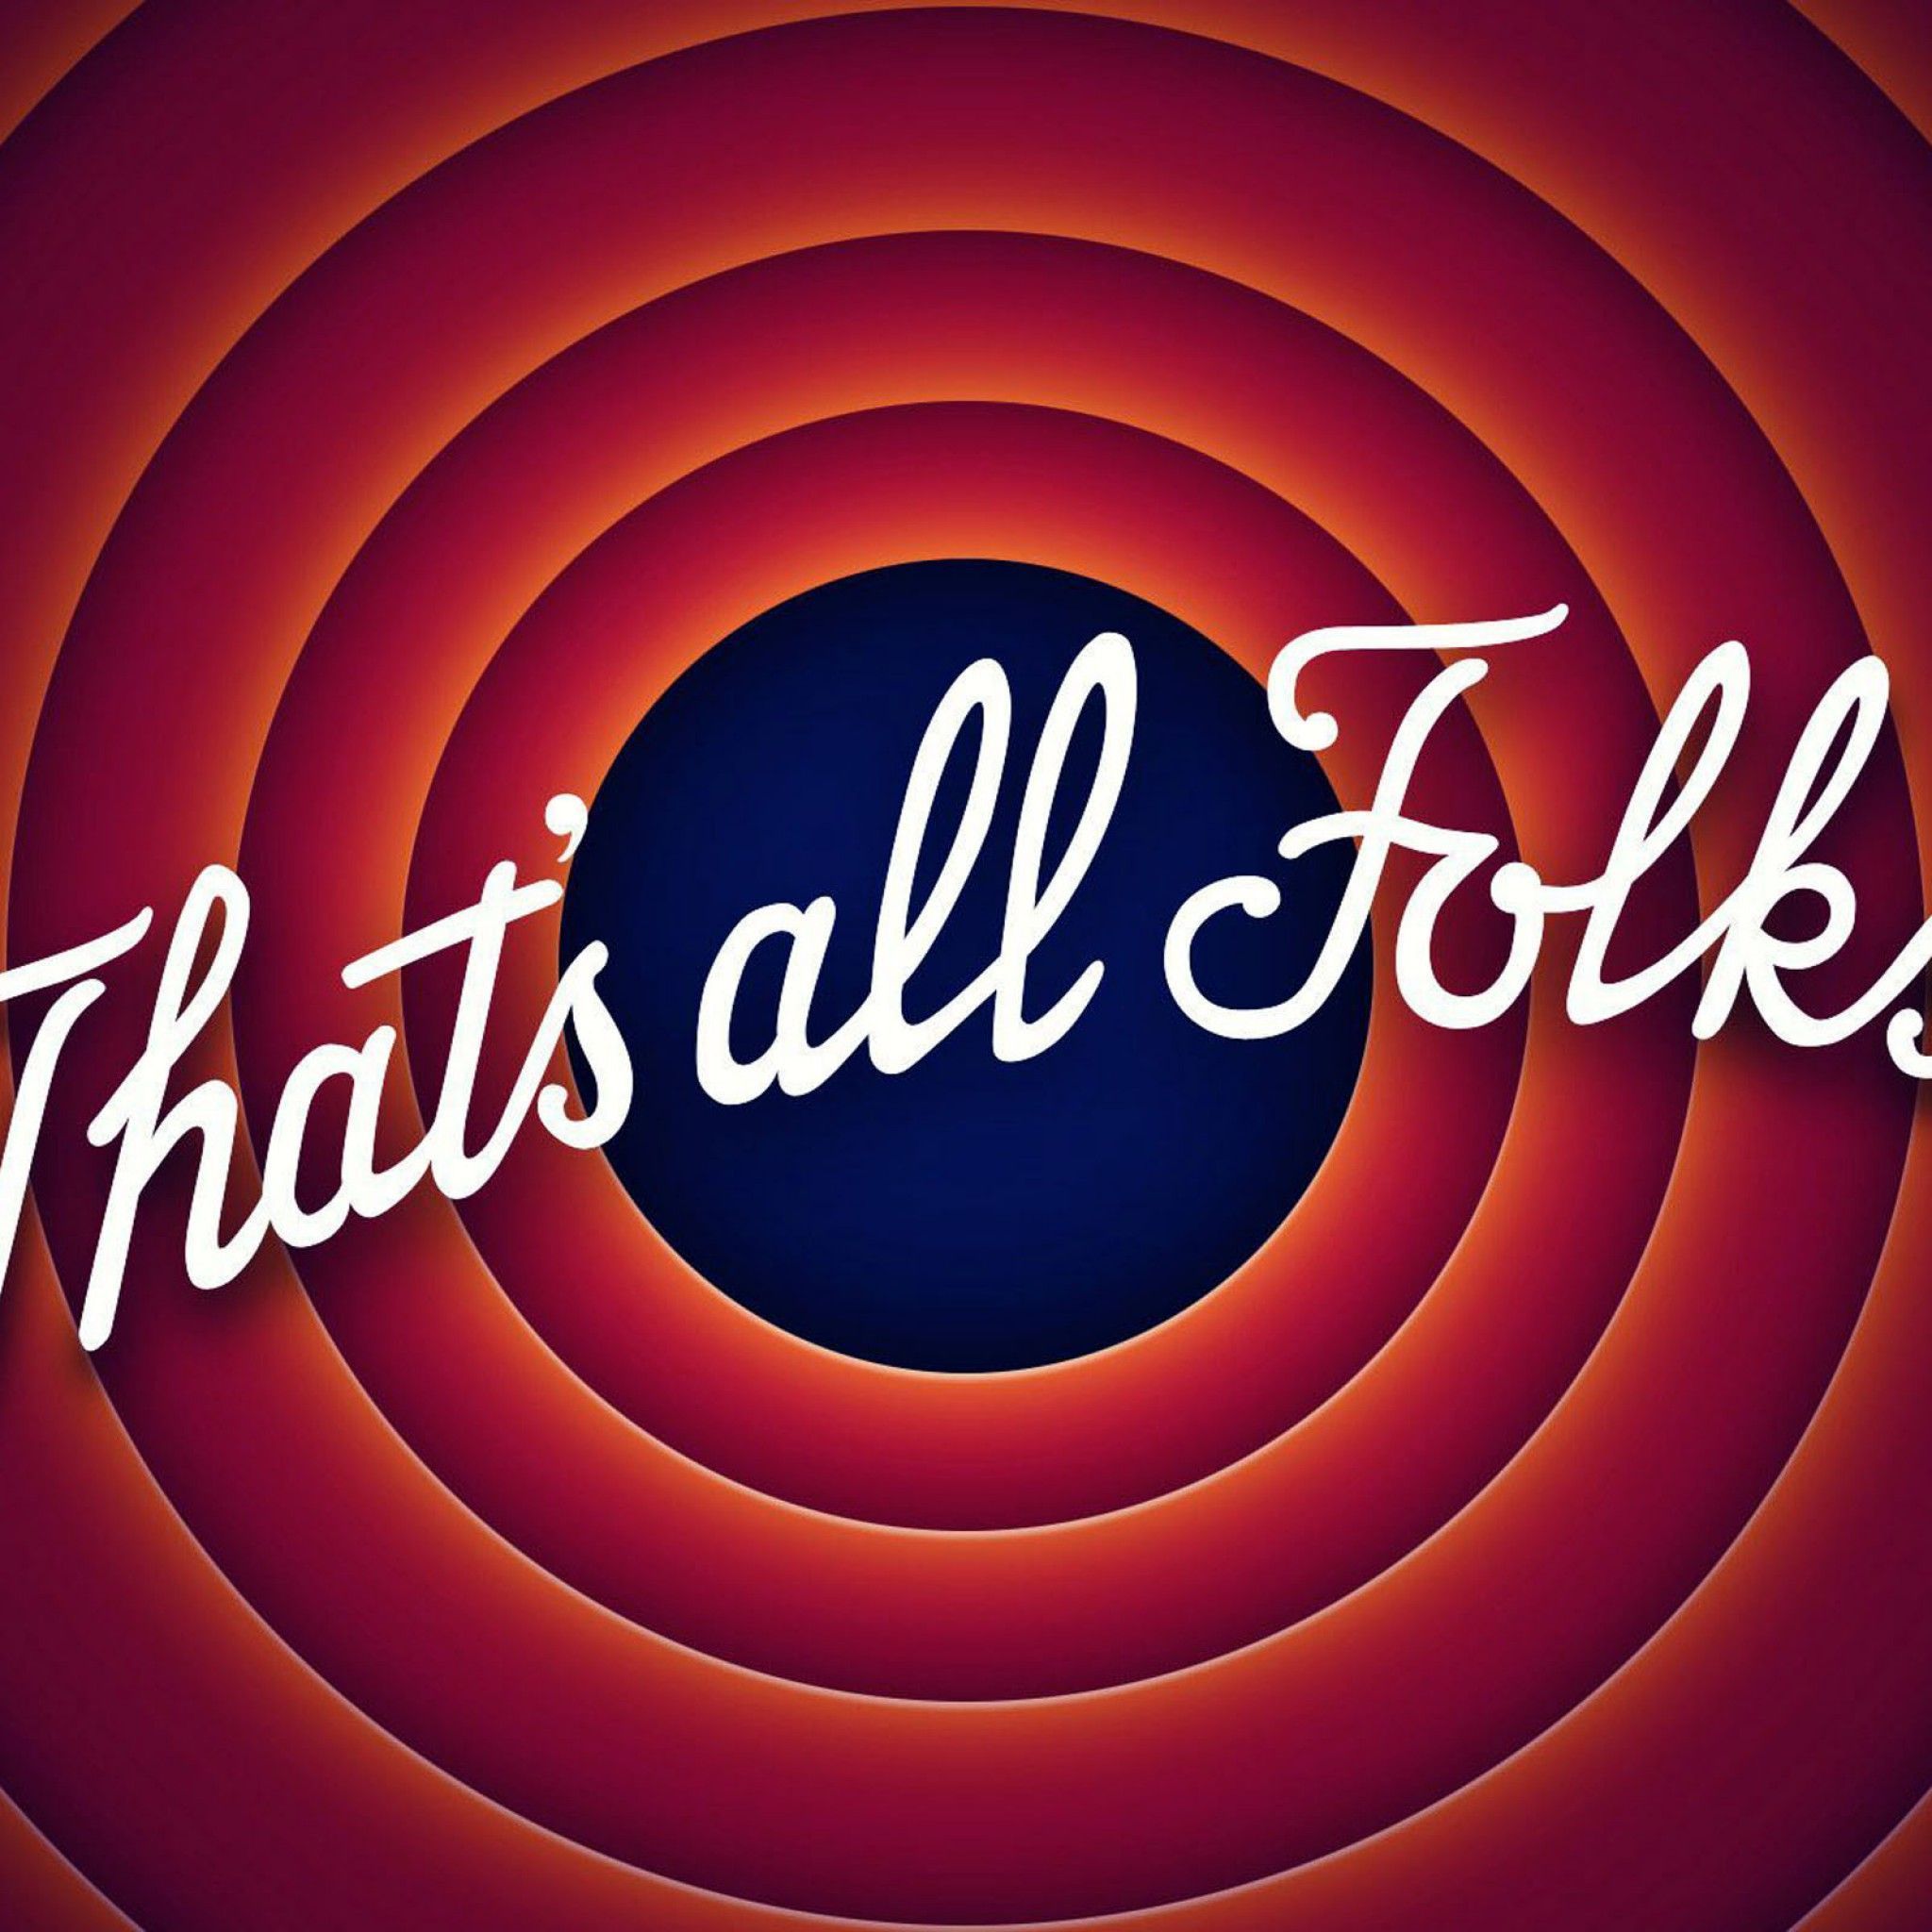 That's all Folks! wallpaper | Wallpapers Design